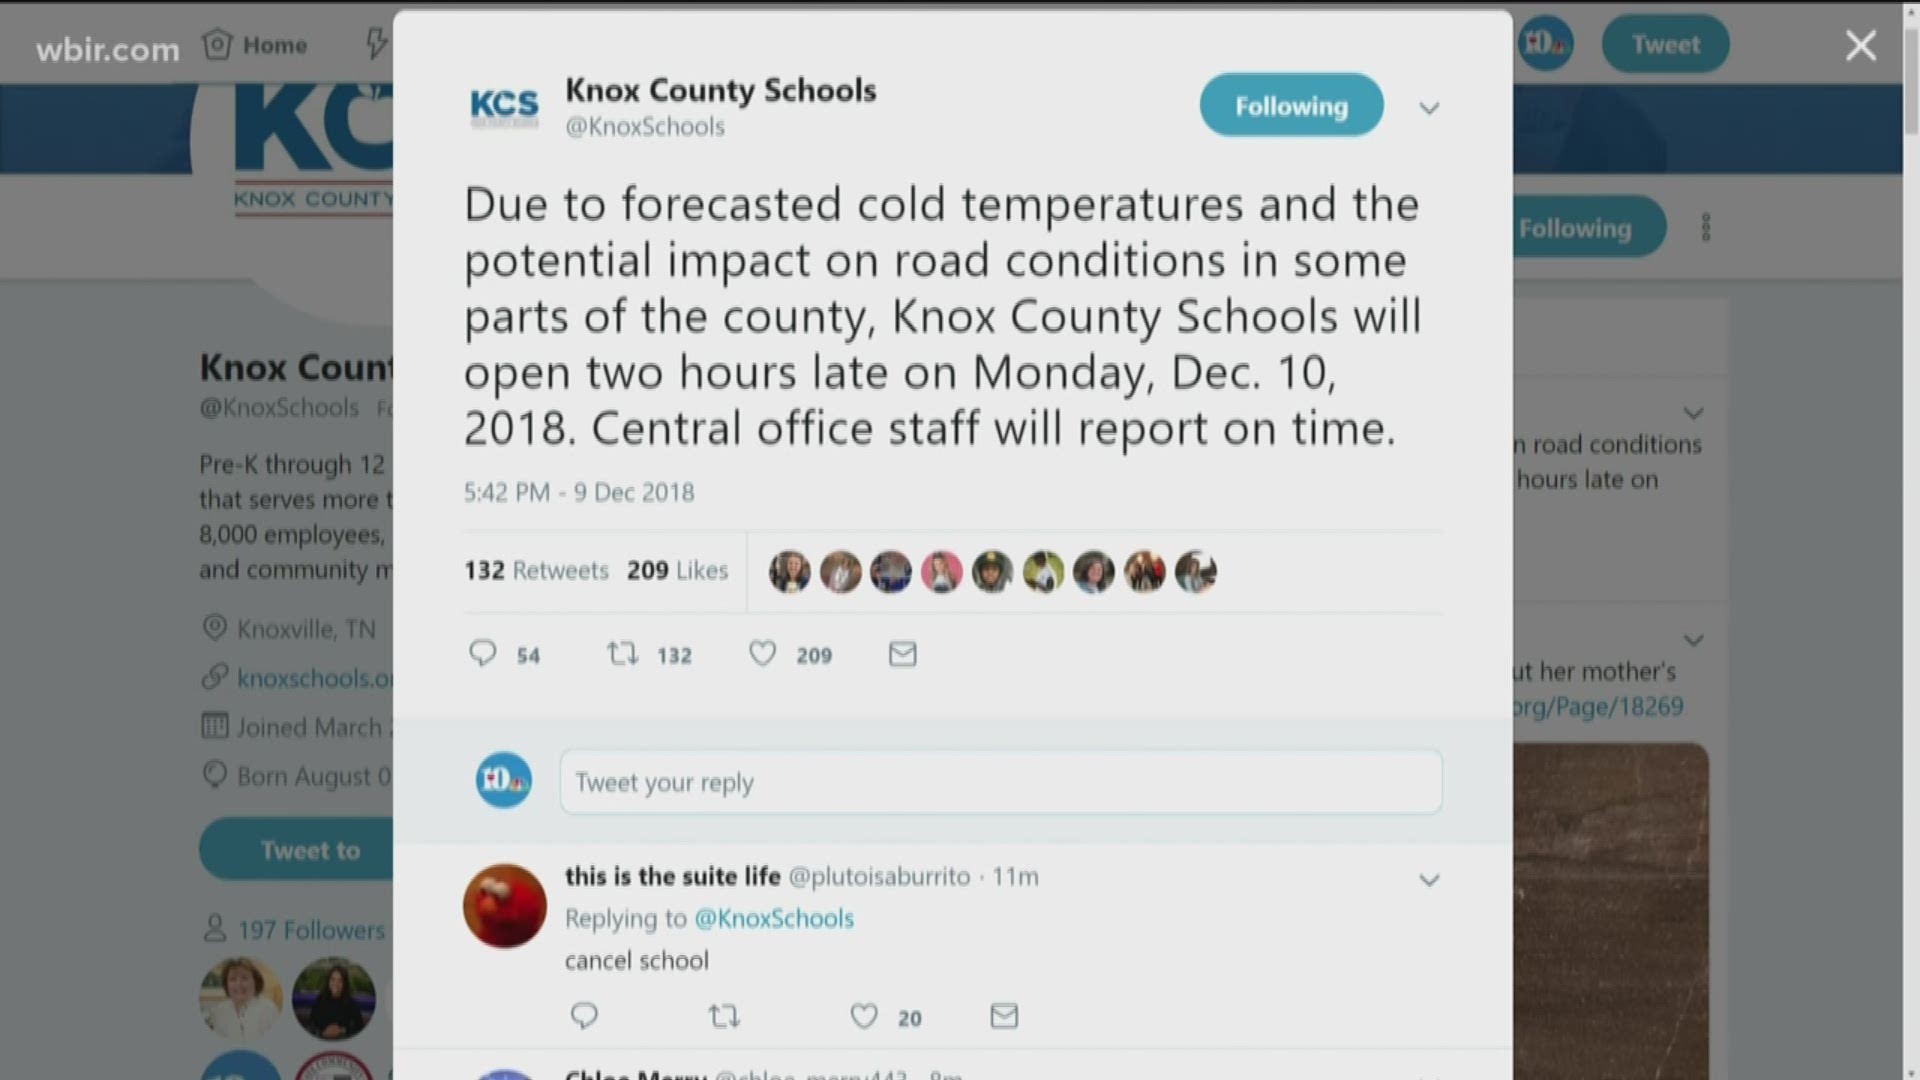 The school will have a two-hour for Monday, Dec. 10 2018.